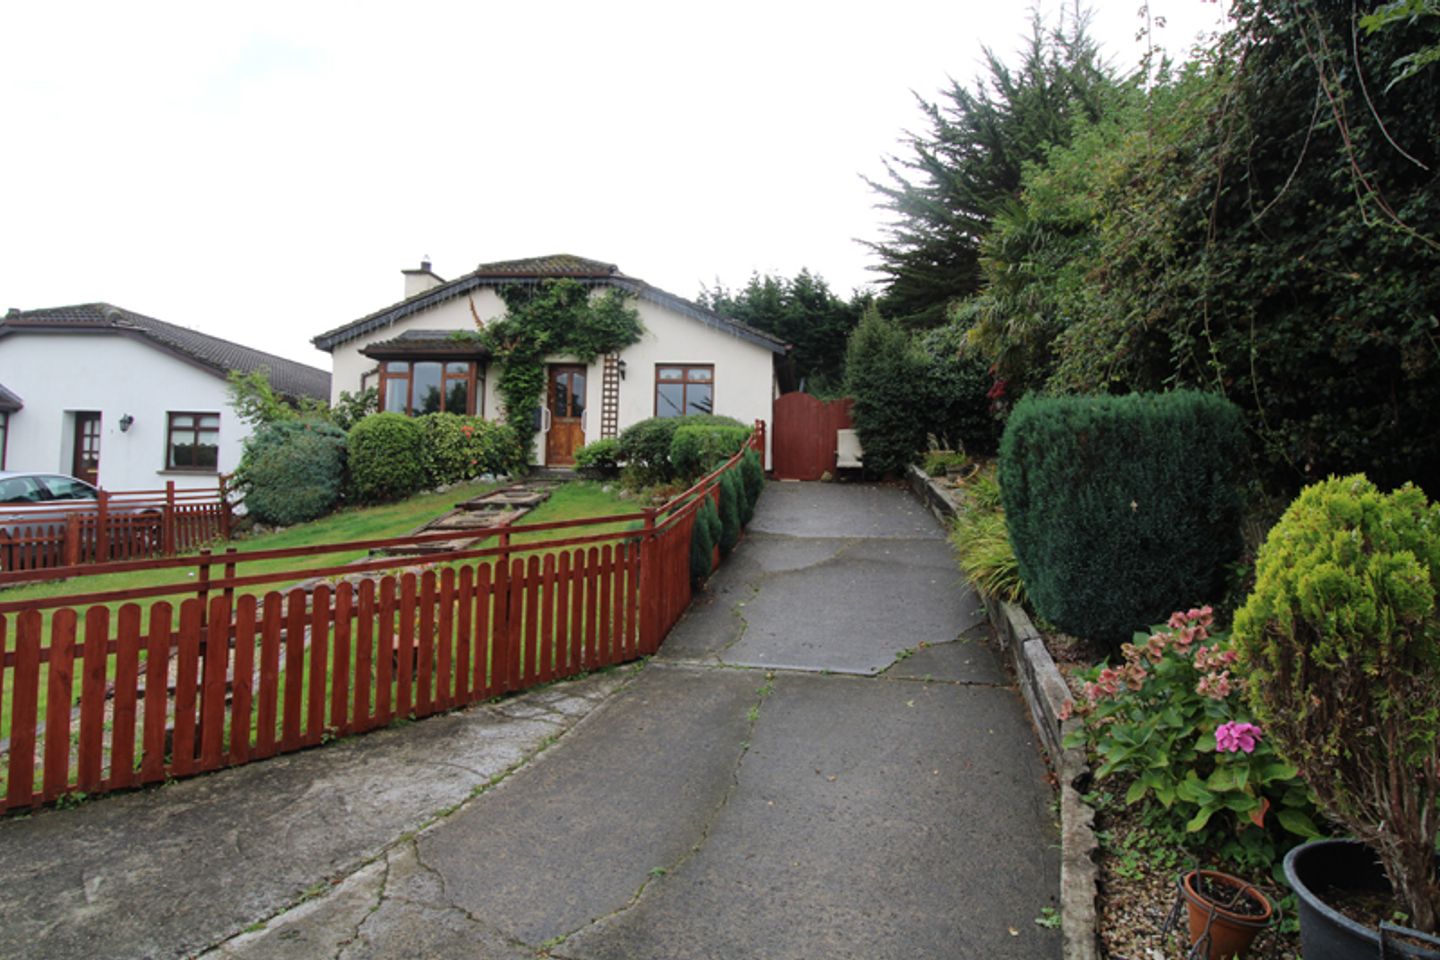 1A Brooklands, Marlton Road, Wicklow Town, Co. Wicklow